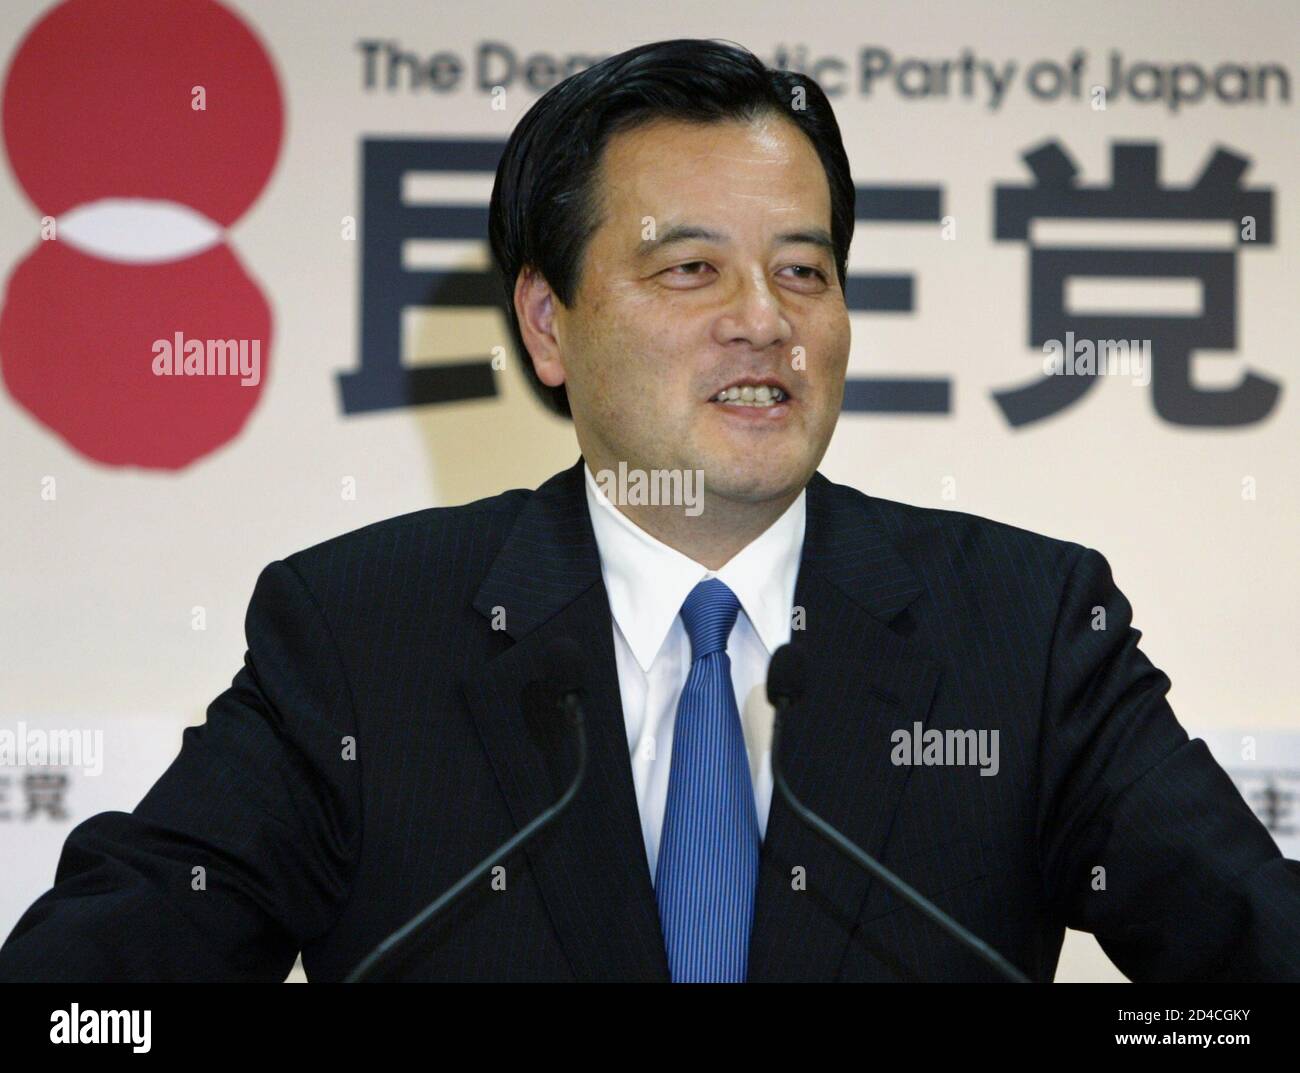 Katsuya Okada, Japan's newly elected opposition Democratic Party leader, speaks at a news conference at his party's headquarters in Tokyo May 18, 2004. Hit by a furore over missed pension payments that has also ensnared the prime minister, Japan's main opposition party on Tuesday turned to its de facto campaign manager to become leader and rally the ranks ahead of a July election. REUTERS/Issei Kato  IK Stock Photo